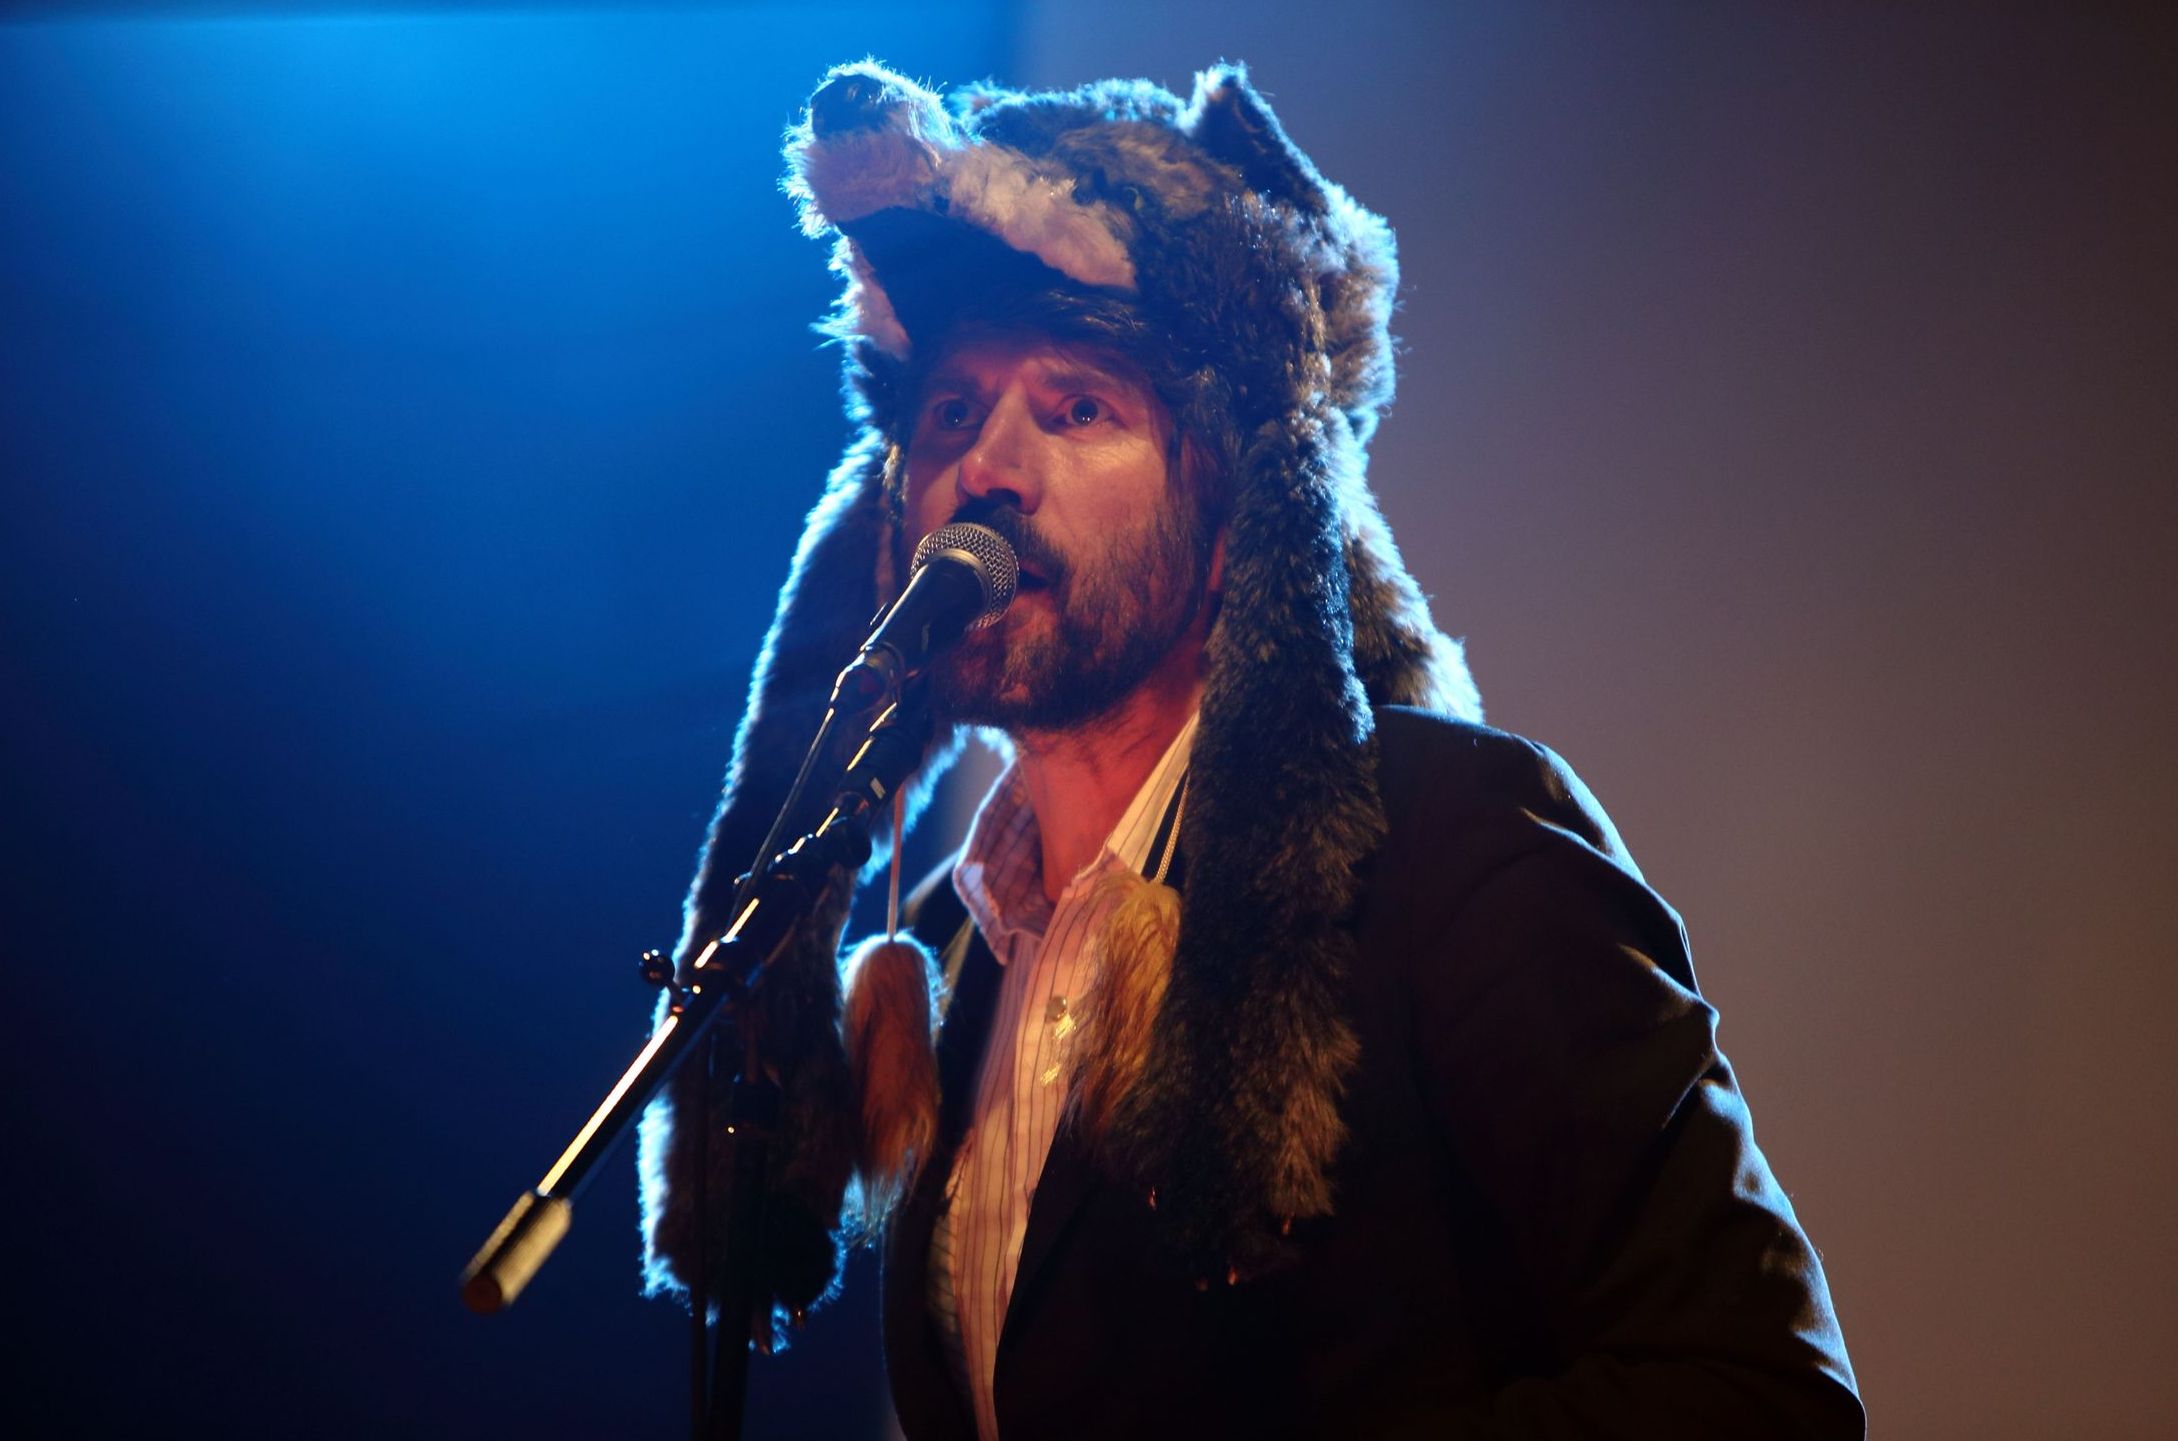 Gruff Rhys performs with hat in American Interior